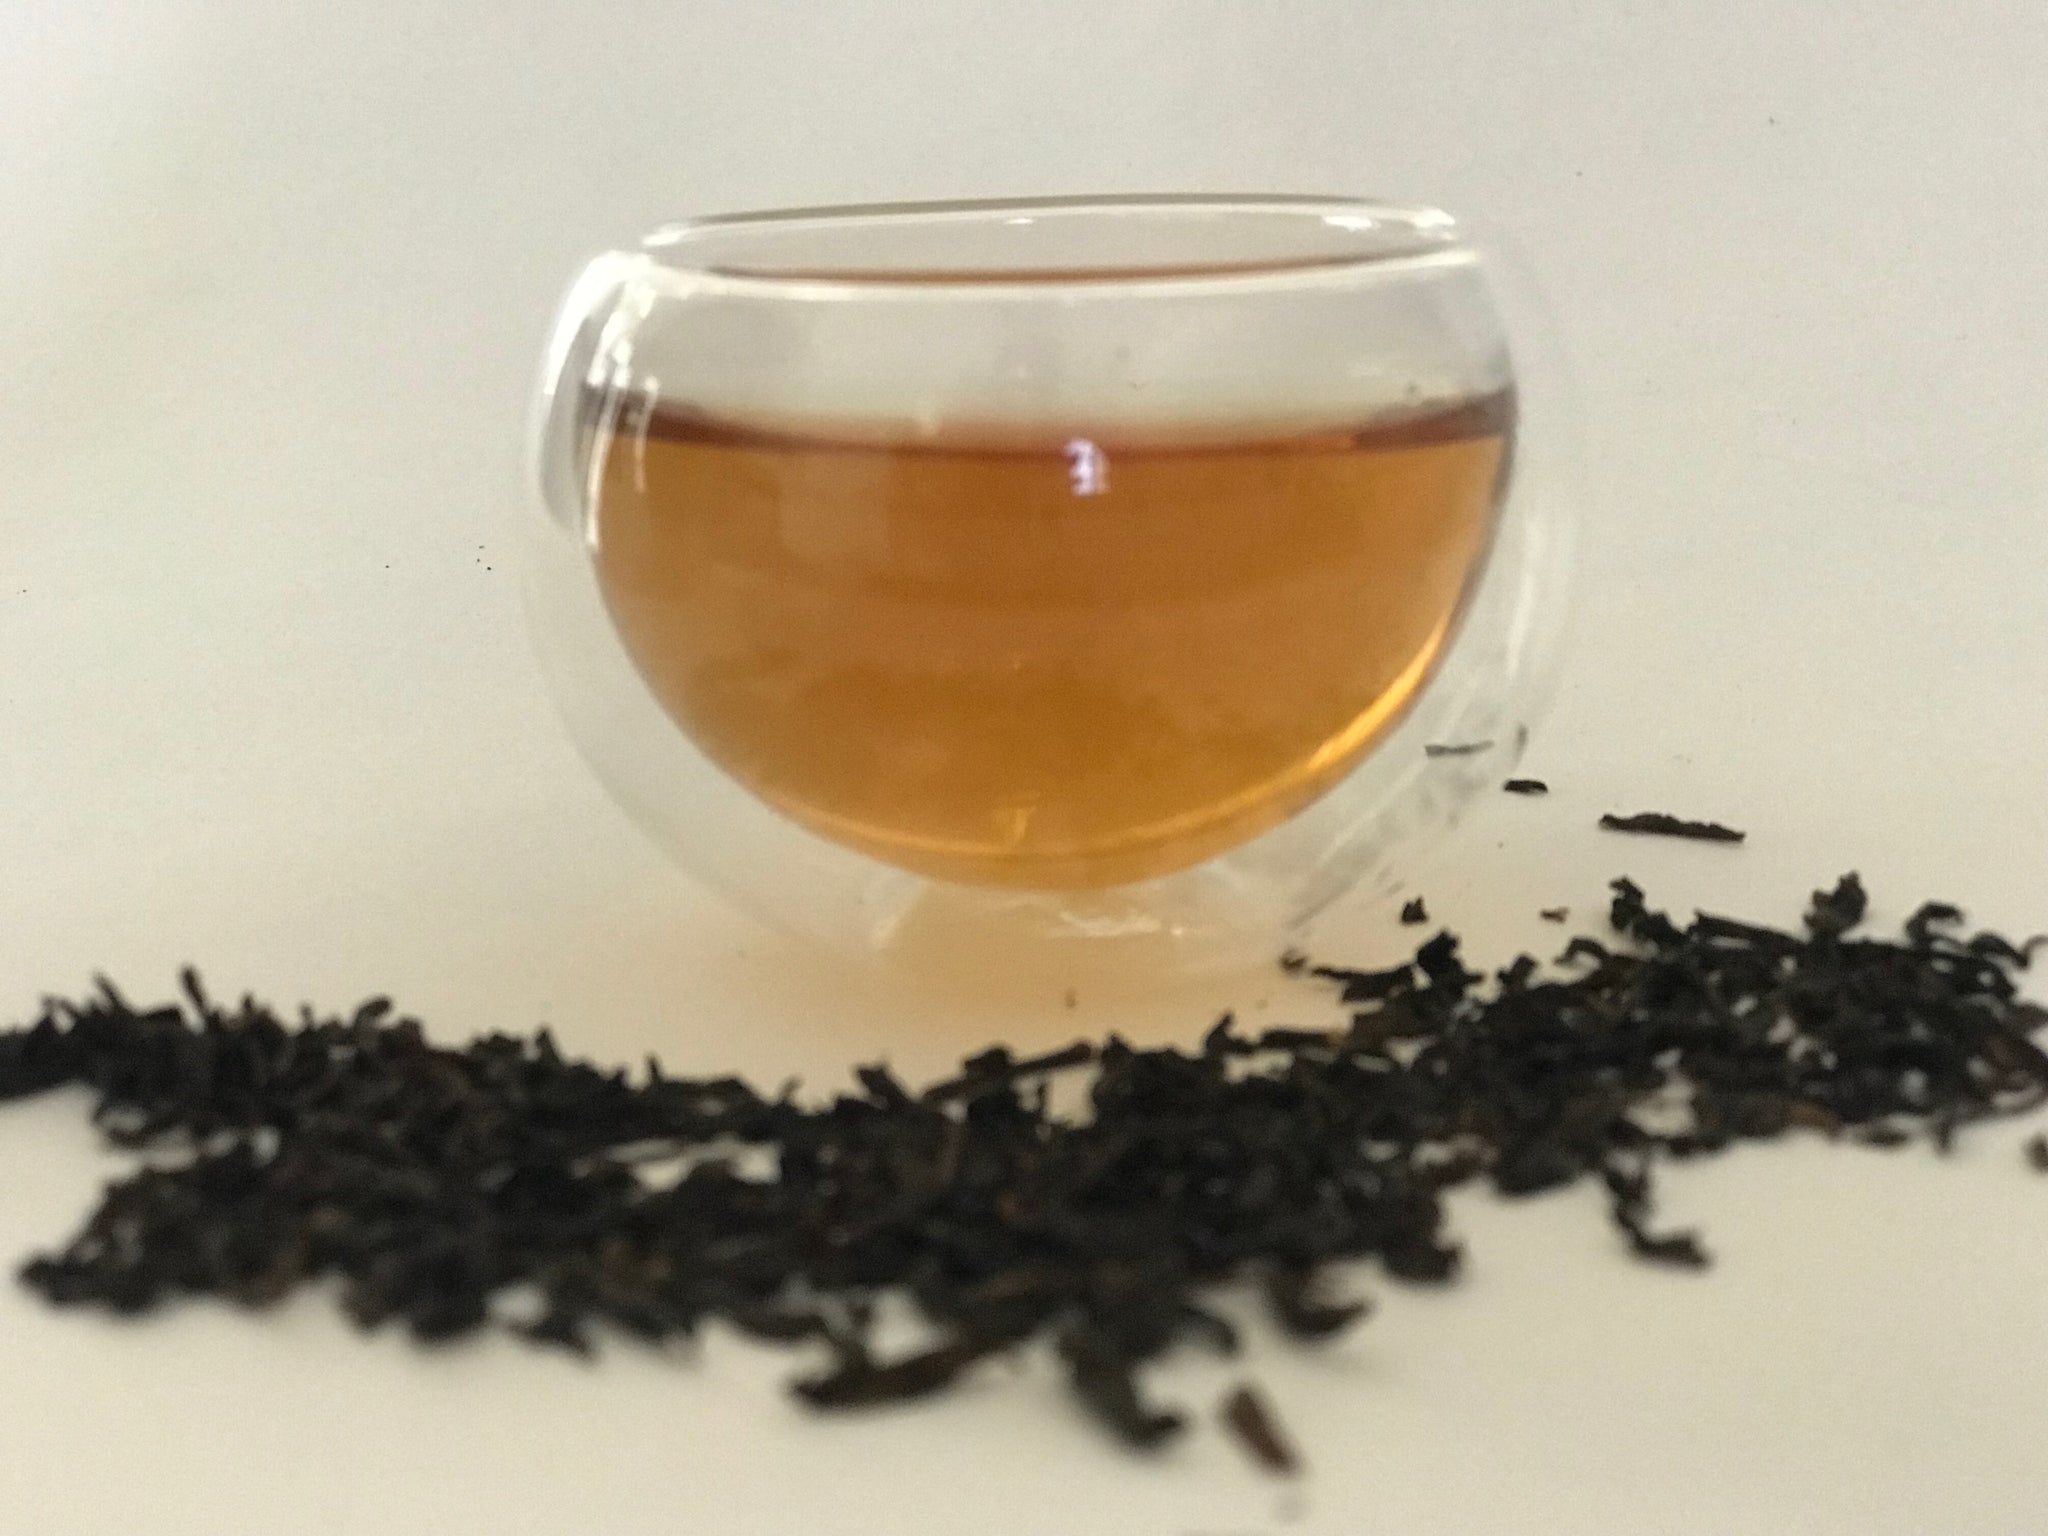 Lapsang Souchong (Smoky) is grown in the birthplace of black tea, Tong Mu Guan in Wuyi mountains in China. It is handcrafted and baked over pine wood using the traditional Chinese methods. It has a pine wood smoky aroma reminiscent of winter campfires and has a smooth taste with sweet and mellow aftertaste.